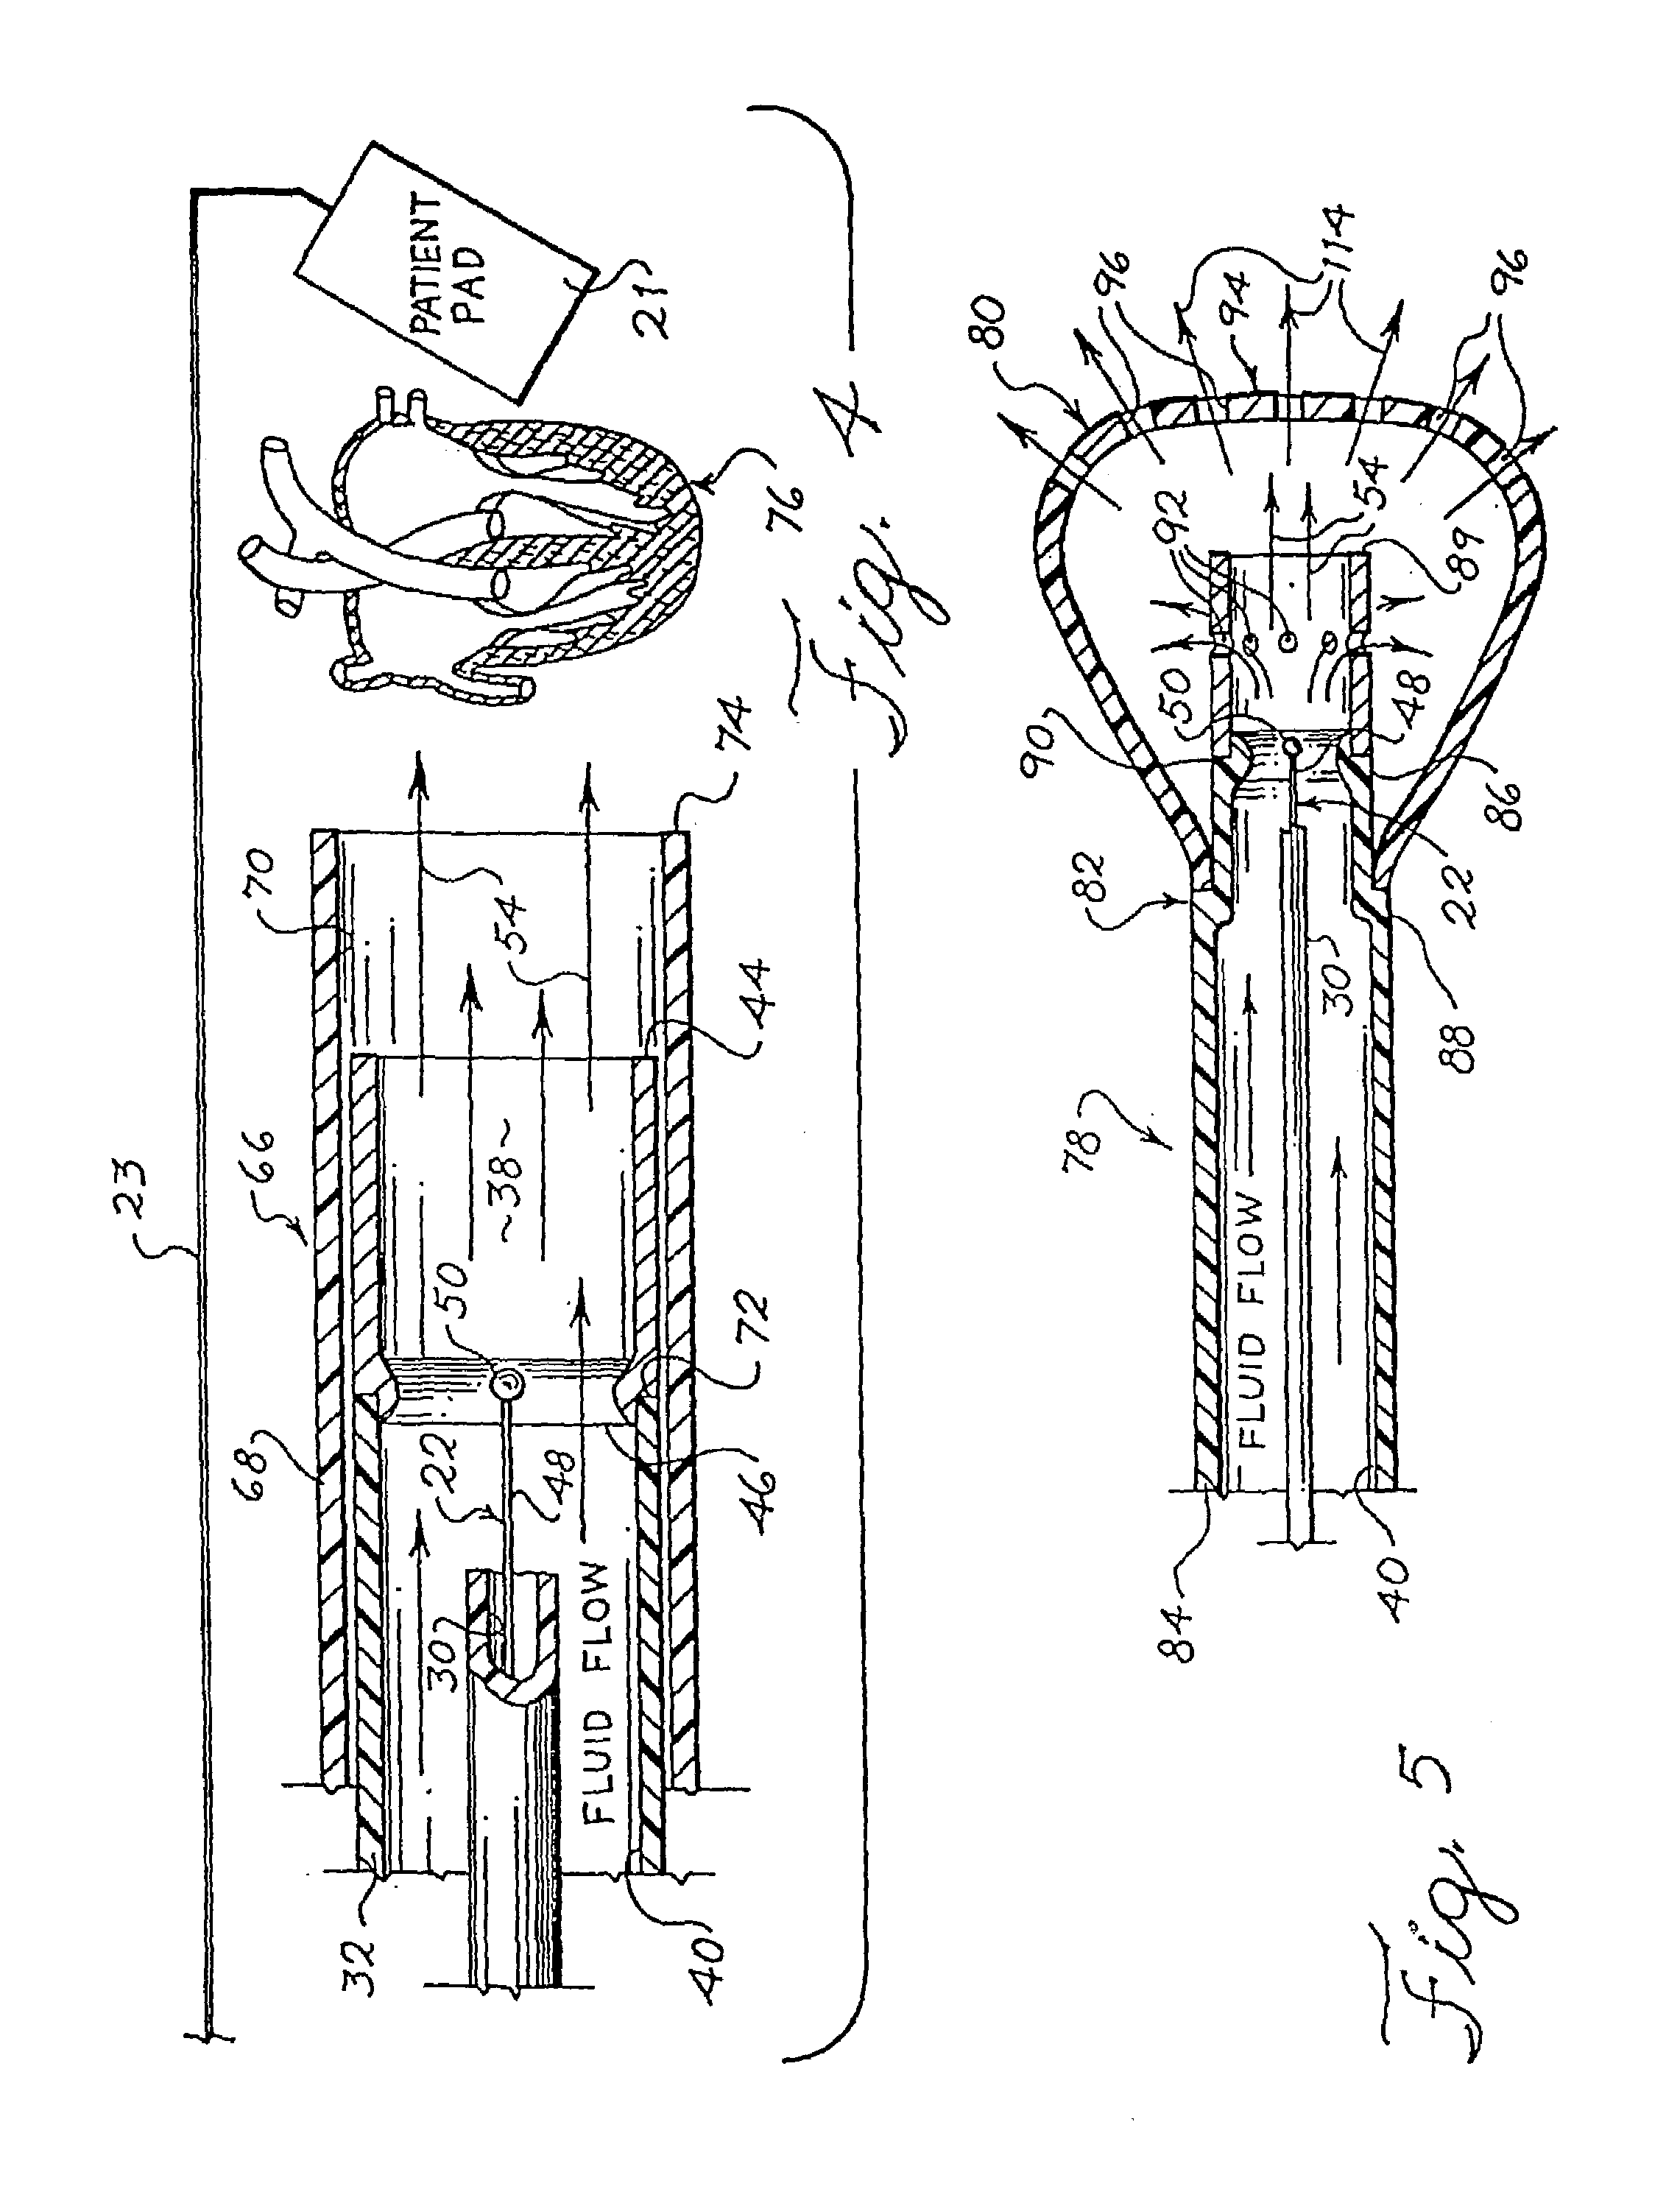 Electrophysiology energy treatment devices and methods of use